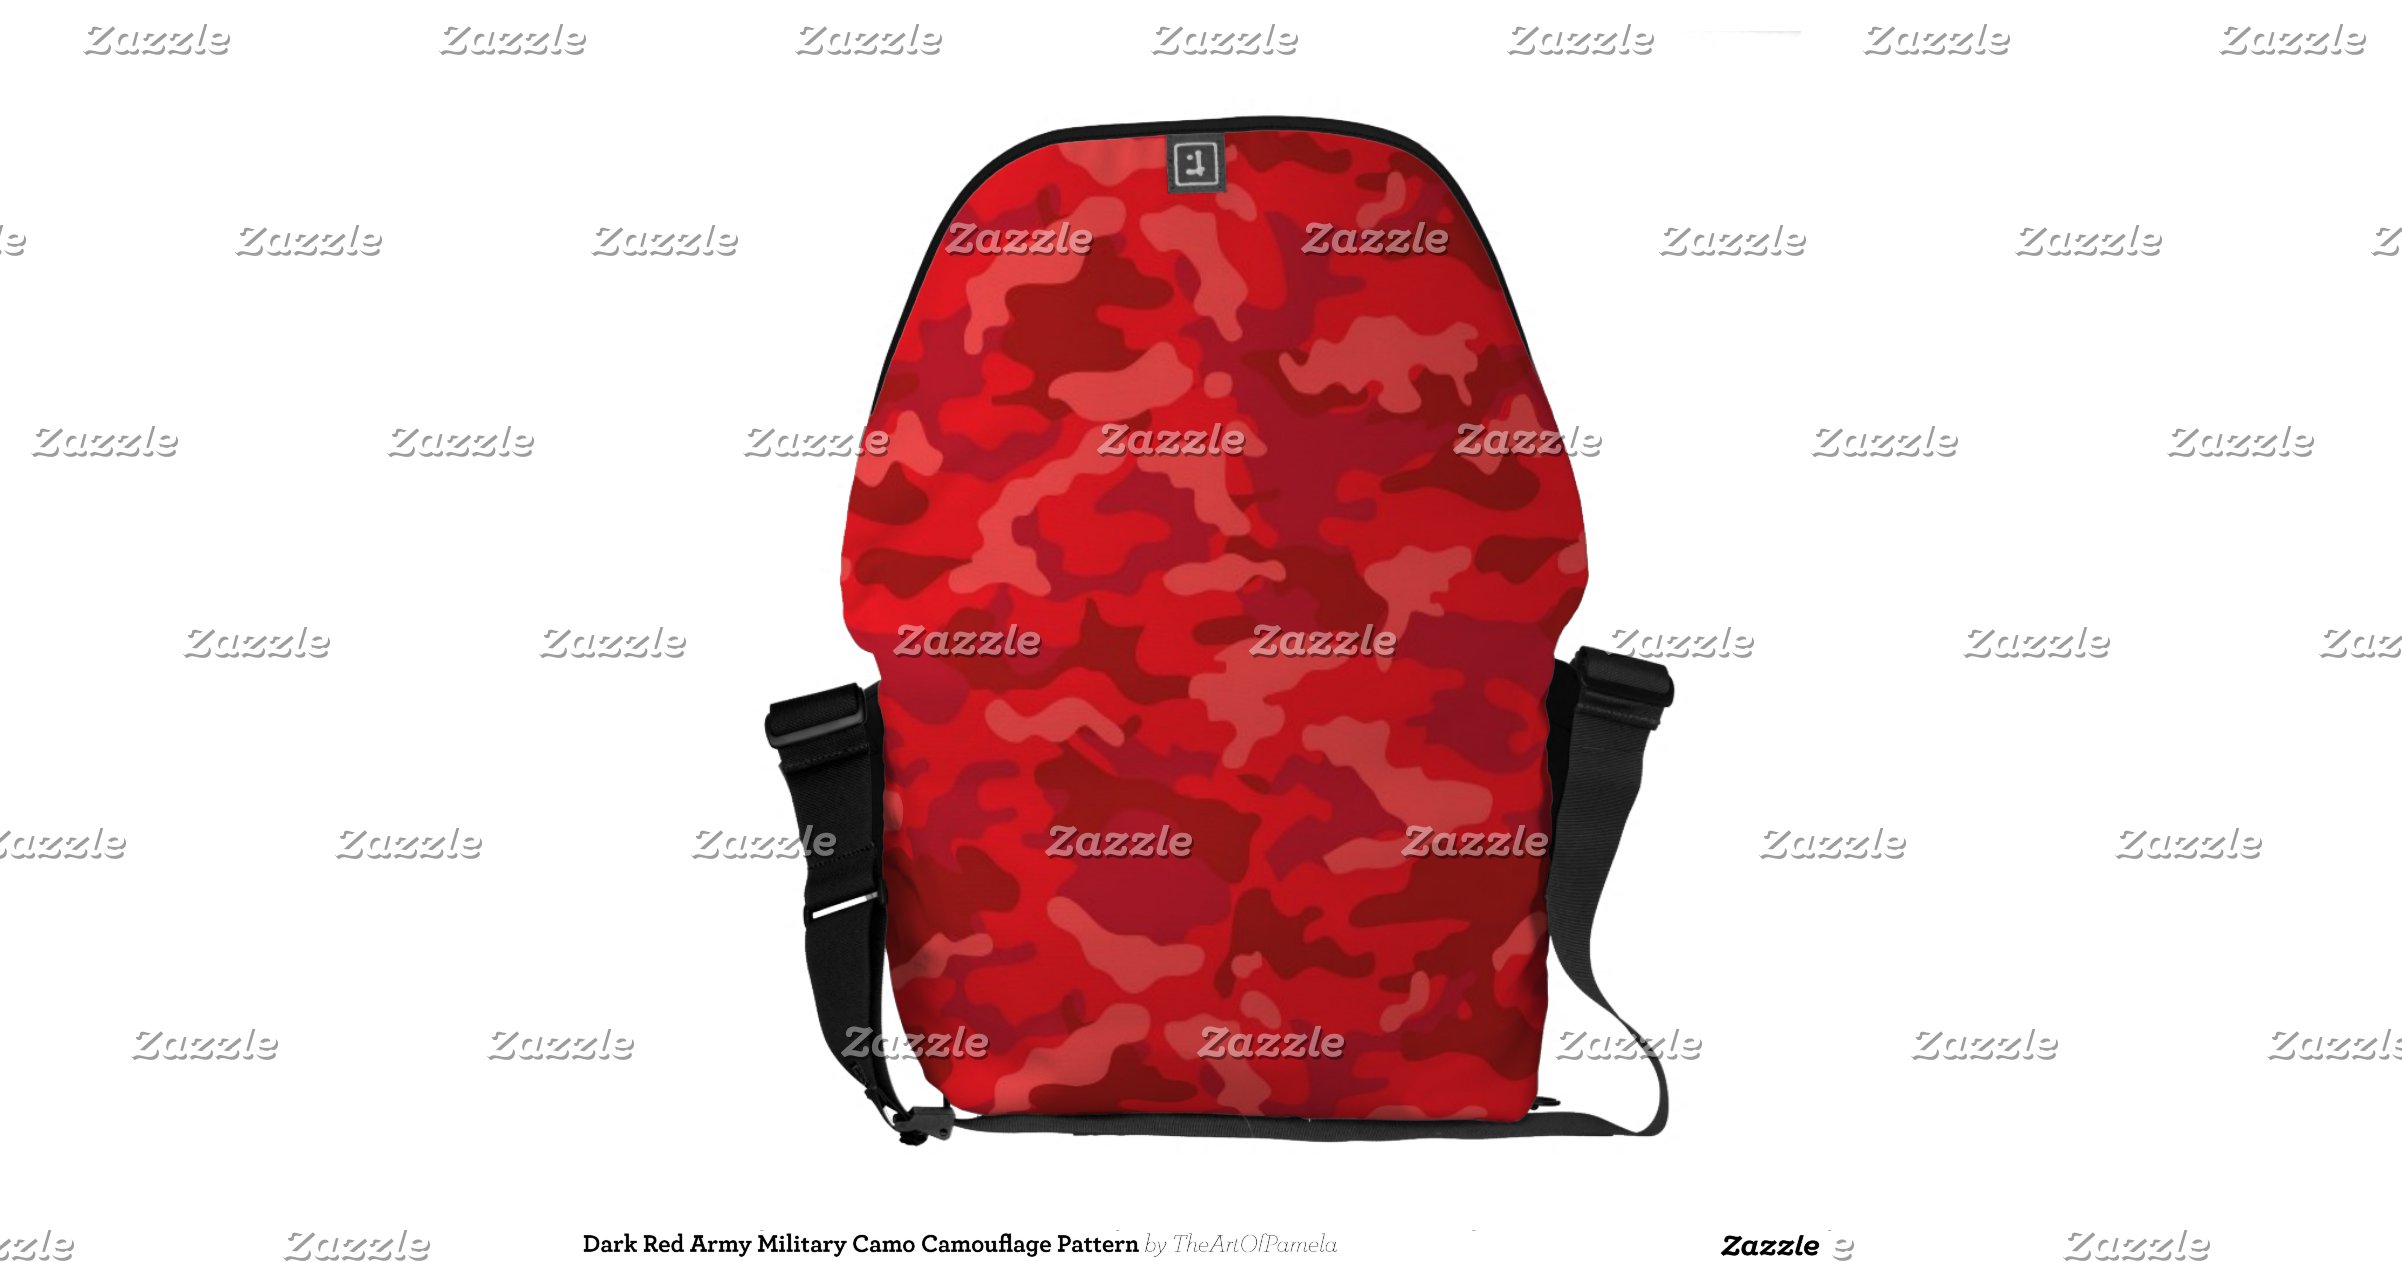 dark_red_army_military_camo_camouflage_pattern_messenger_bag ...